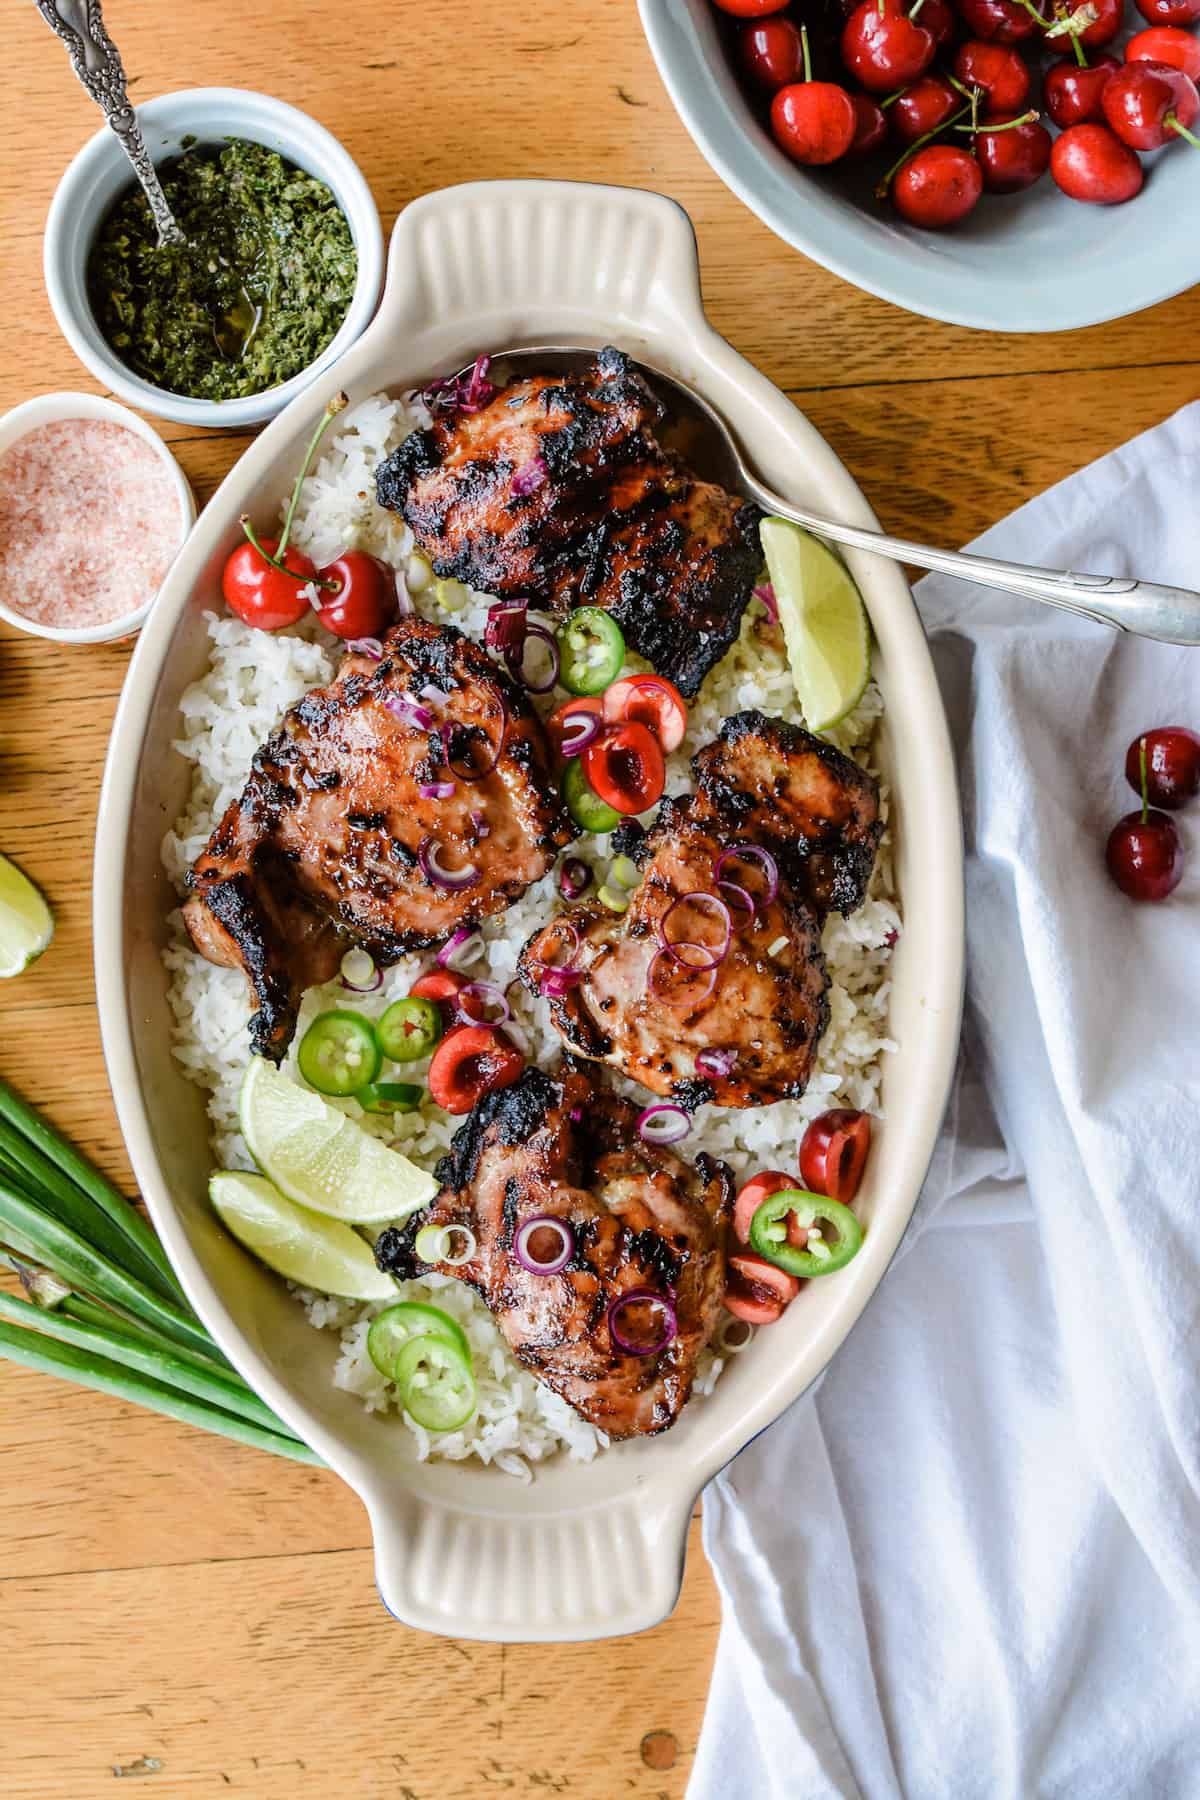 A dish of chicken and rice sitting on a wooden table with cherries.